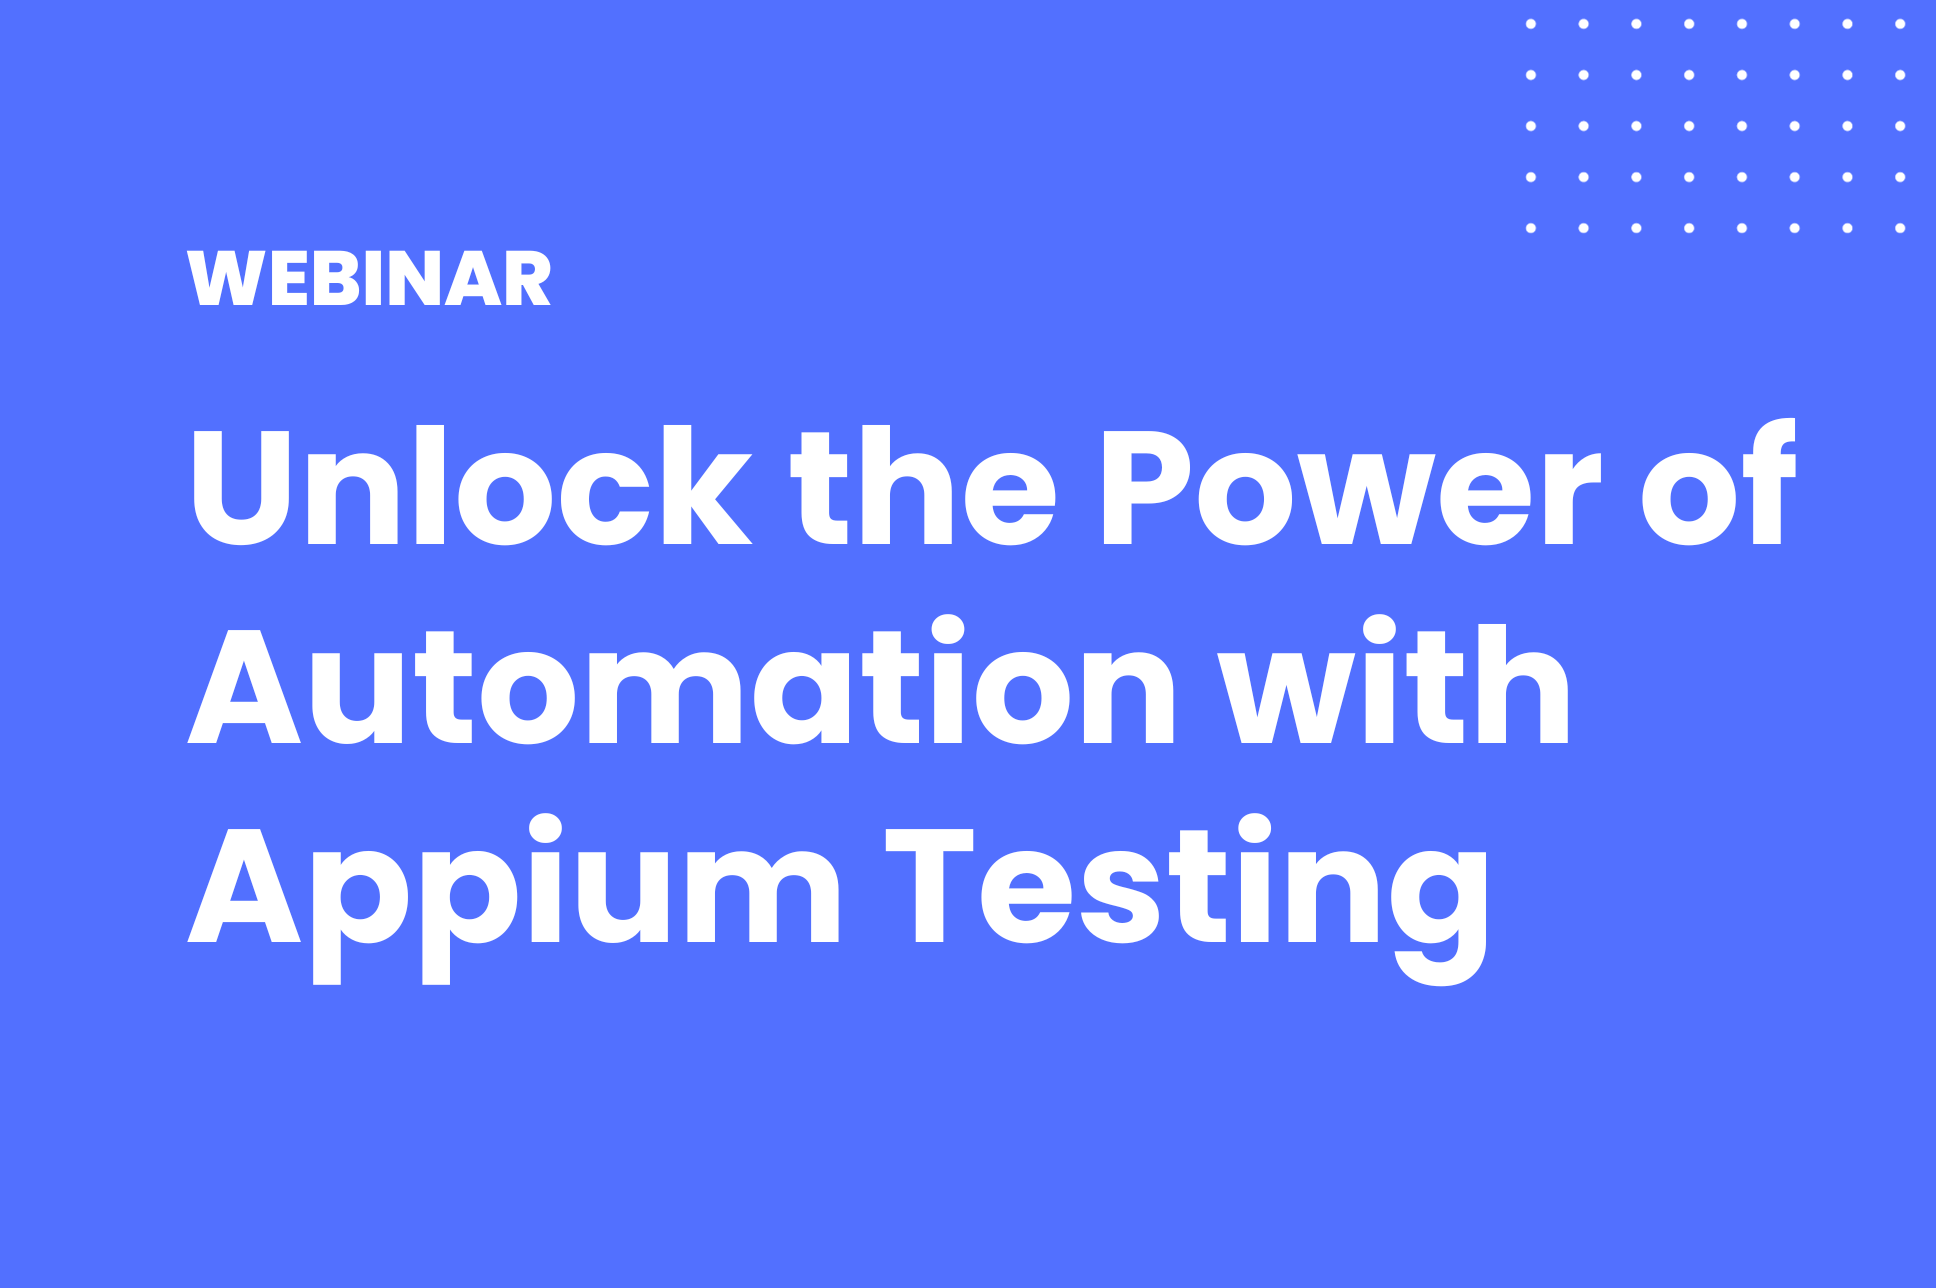 Unlock the Power of Automation with Appium Testing